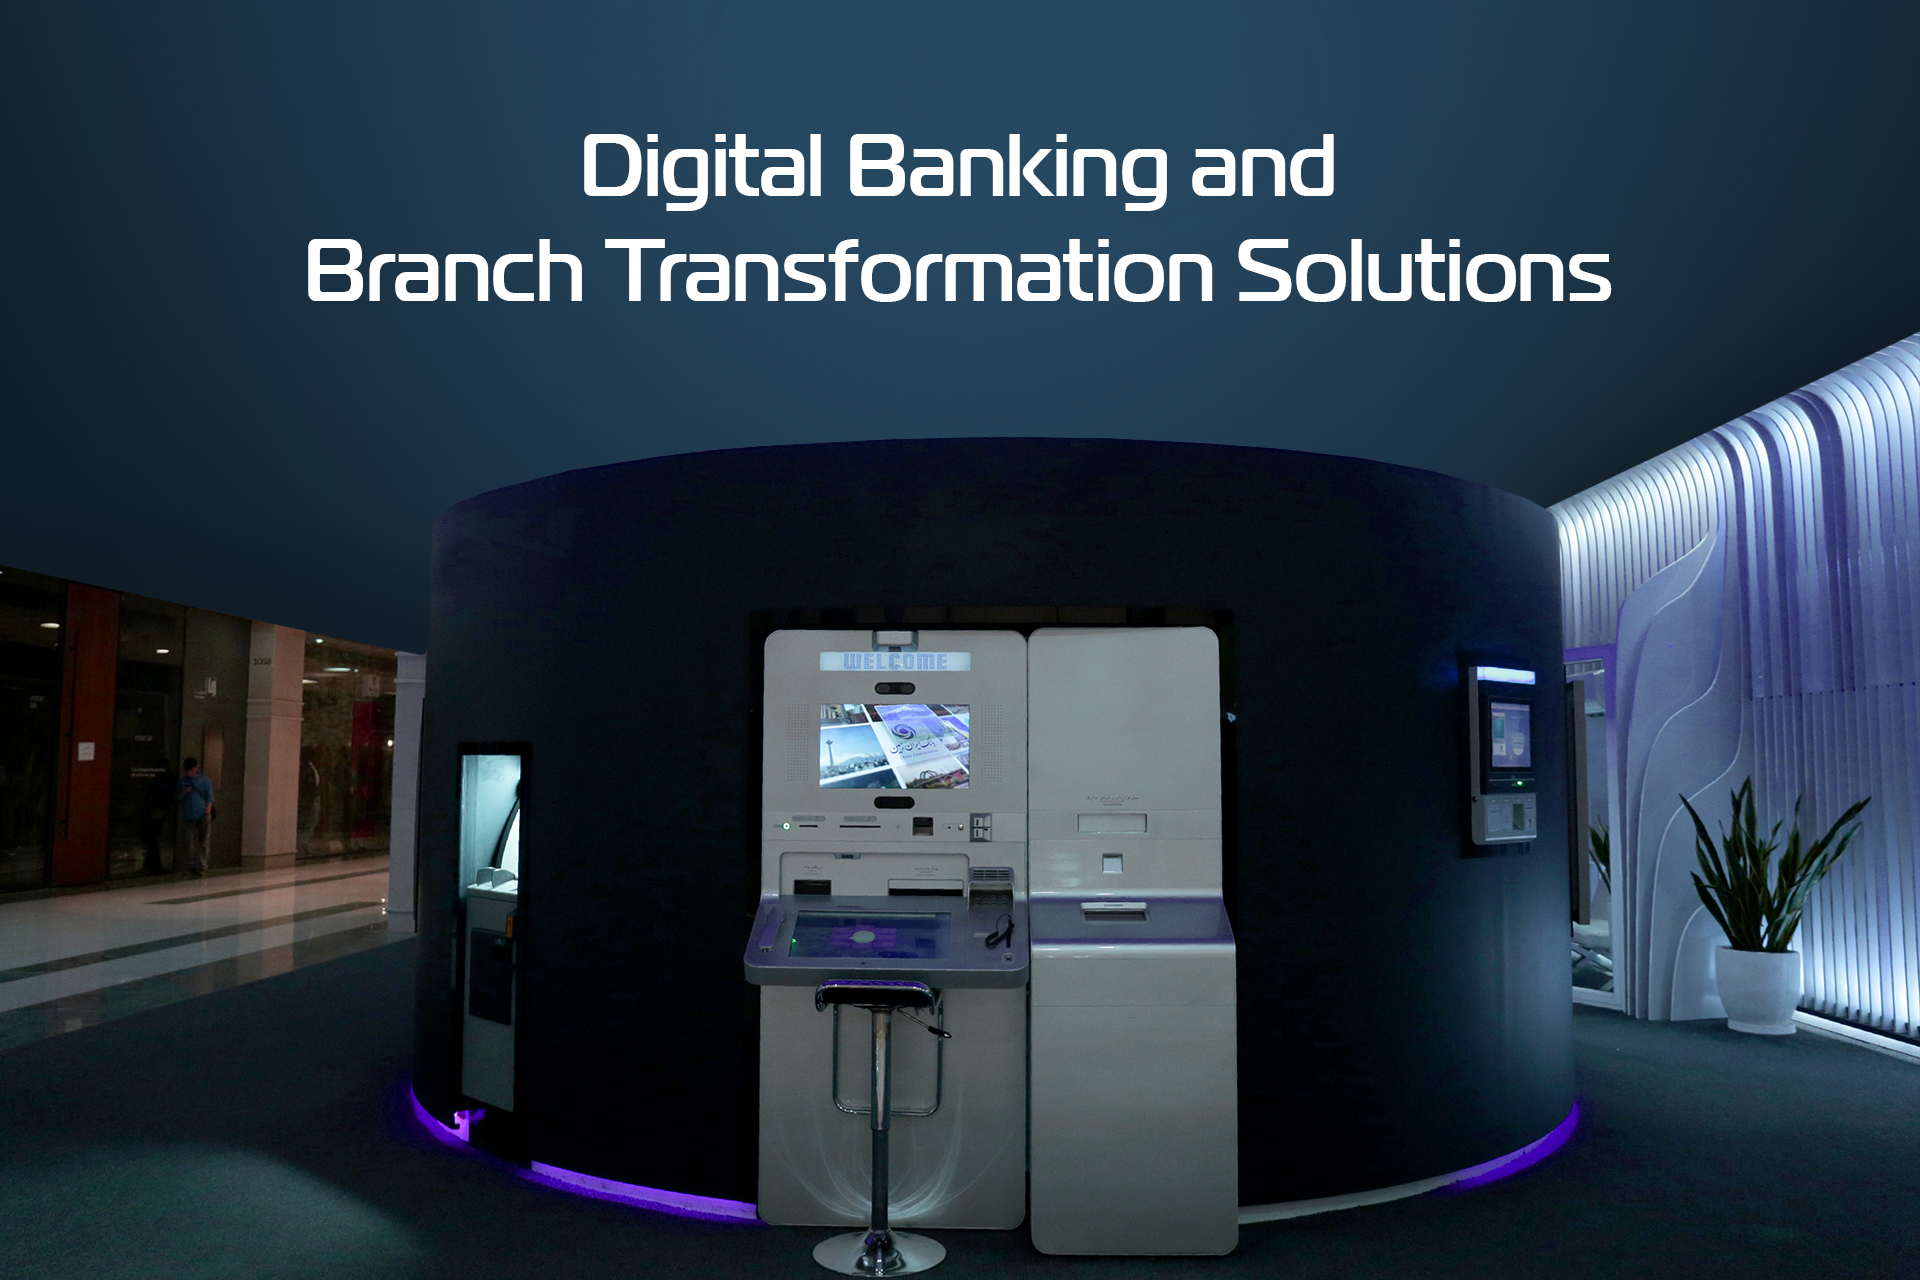 Digital Banking and Branch Transformation Solutions